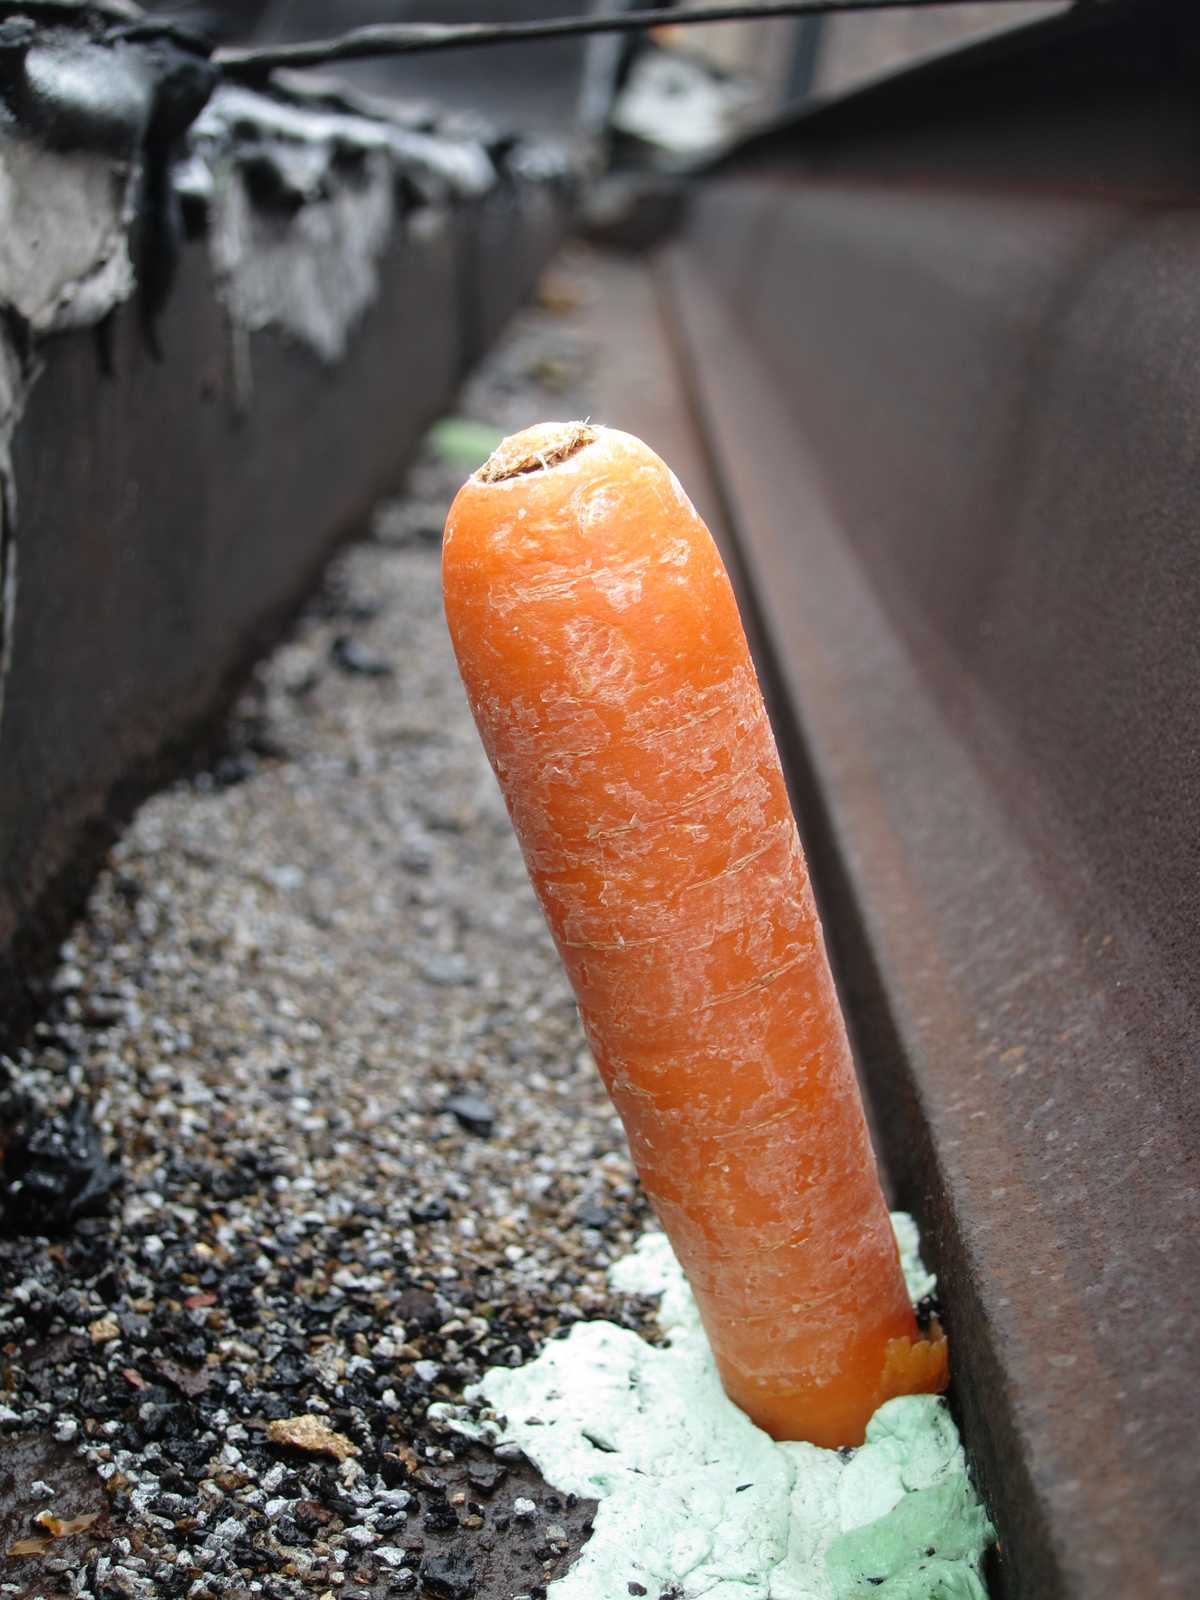 Carrot plugging hole in gutter